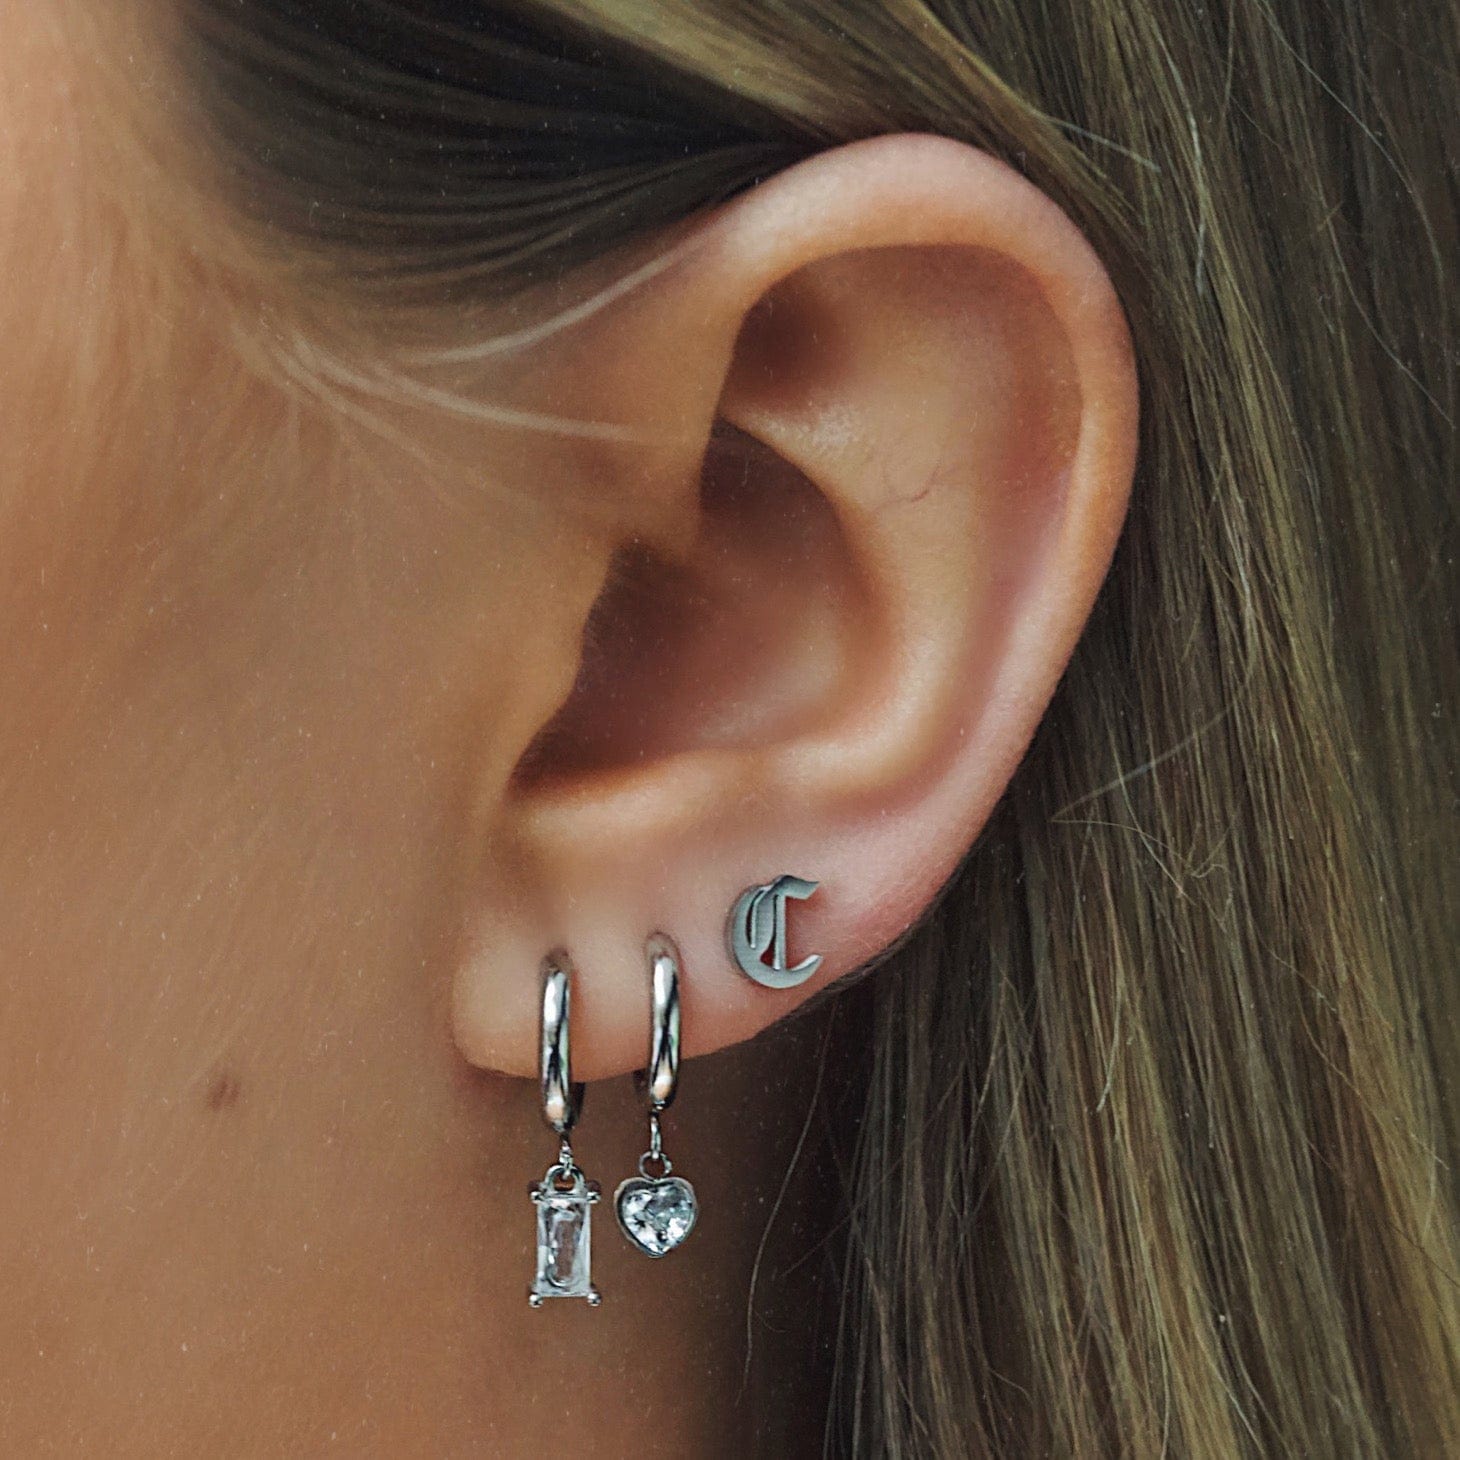 BOHOMOON Stainless Steel Gothic Initial Earrings